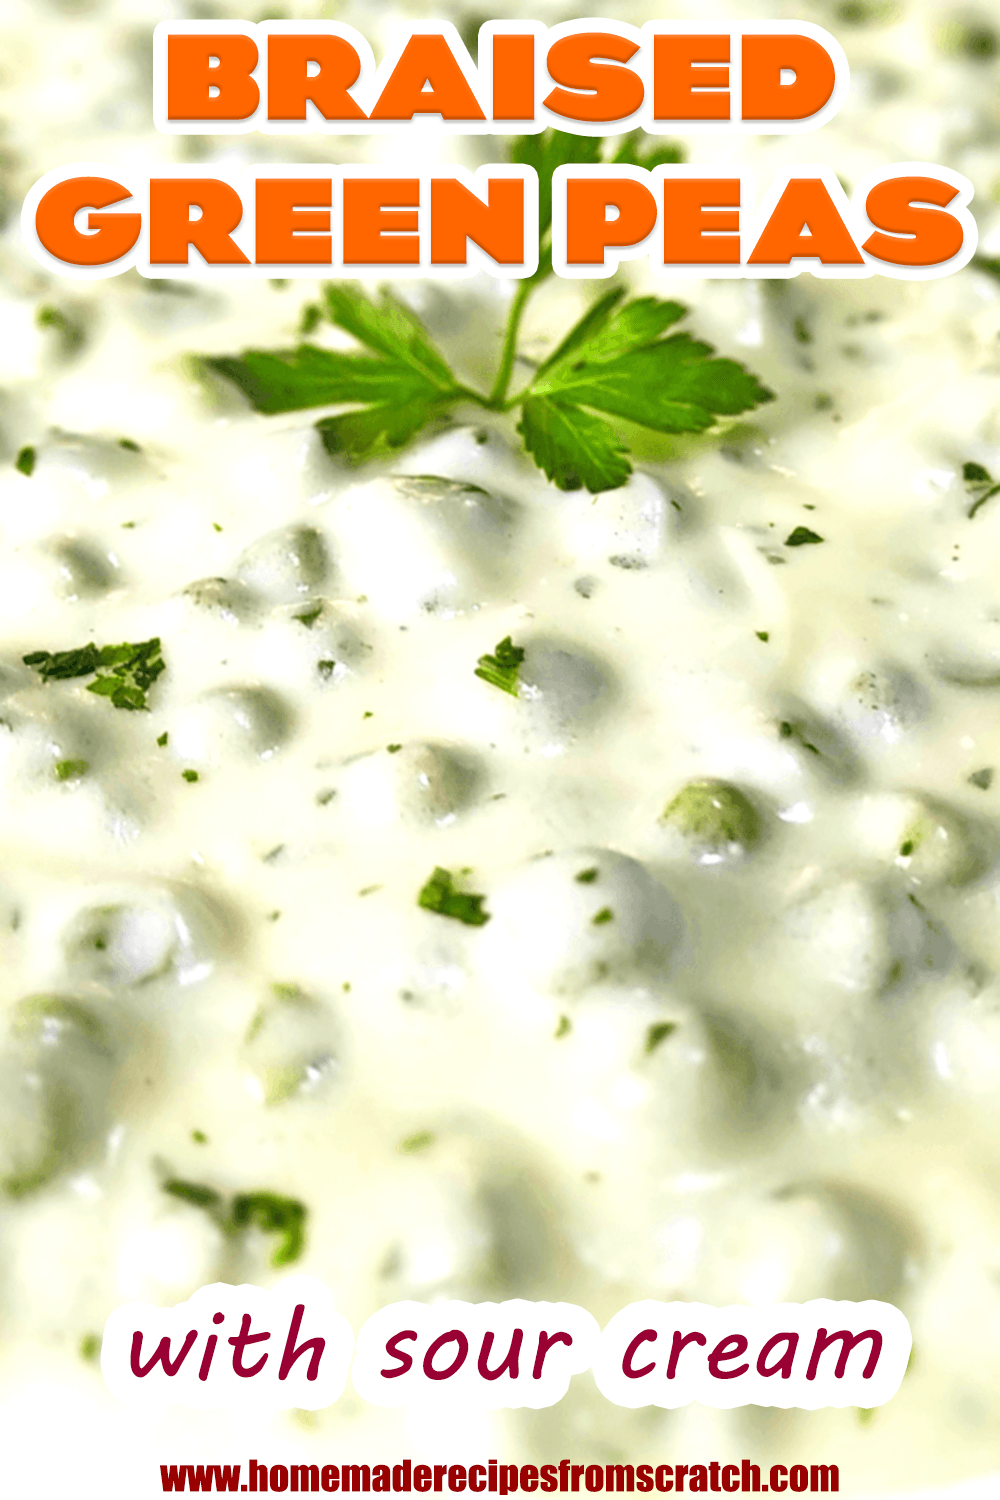 Creamed Peas with Sour Cream Sauce